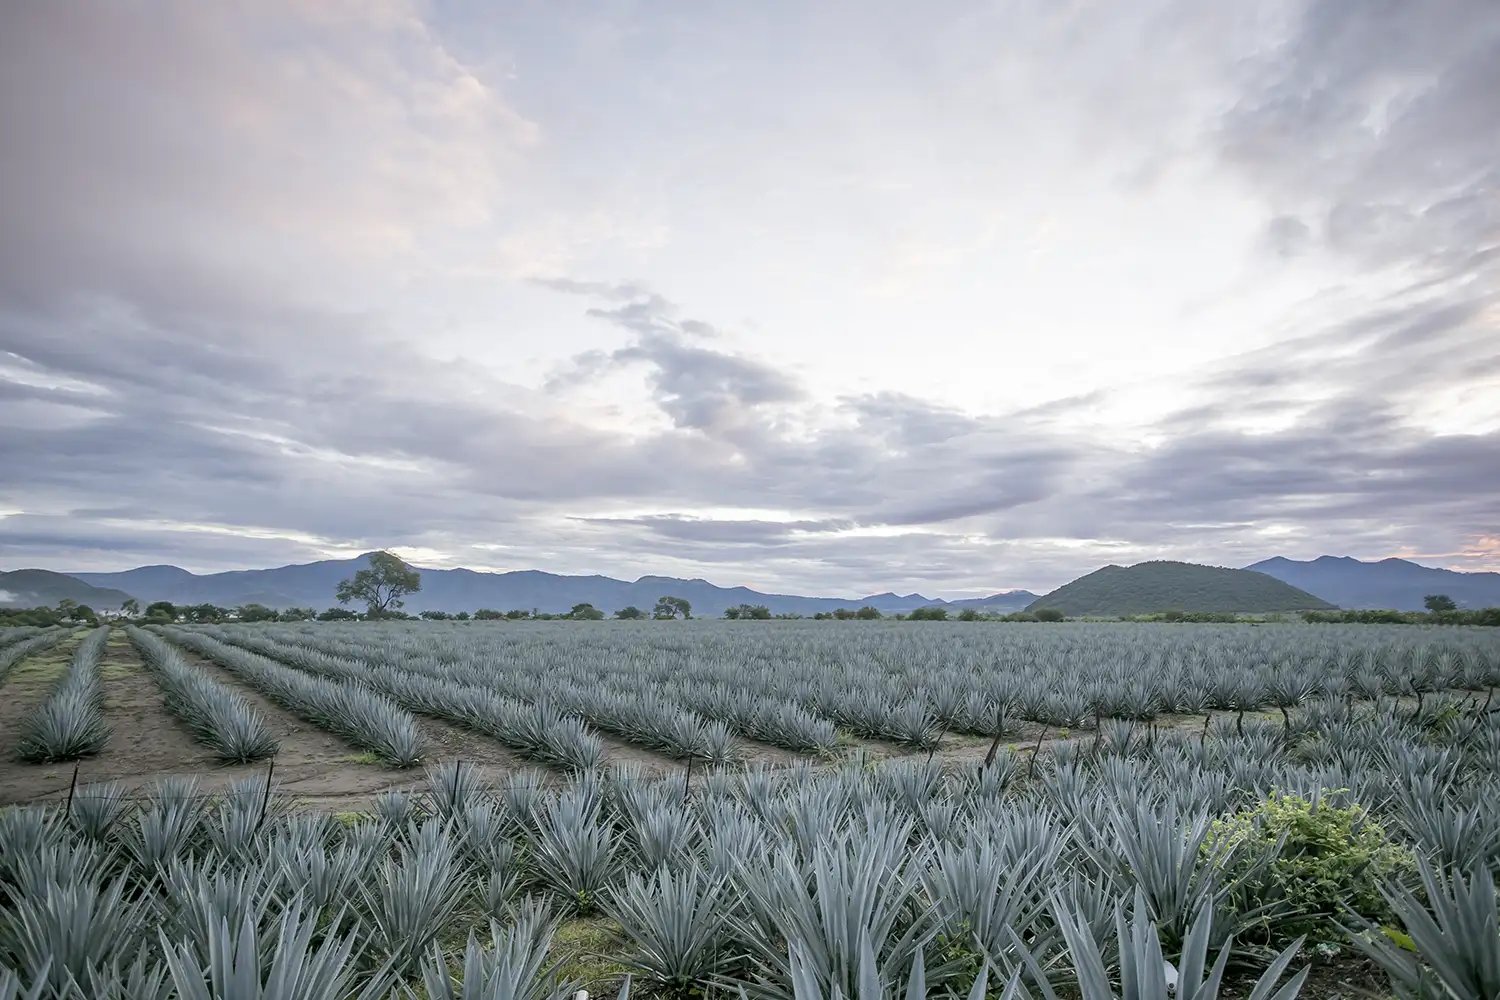 A field of agave plants in Mexico